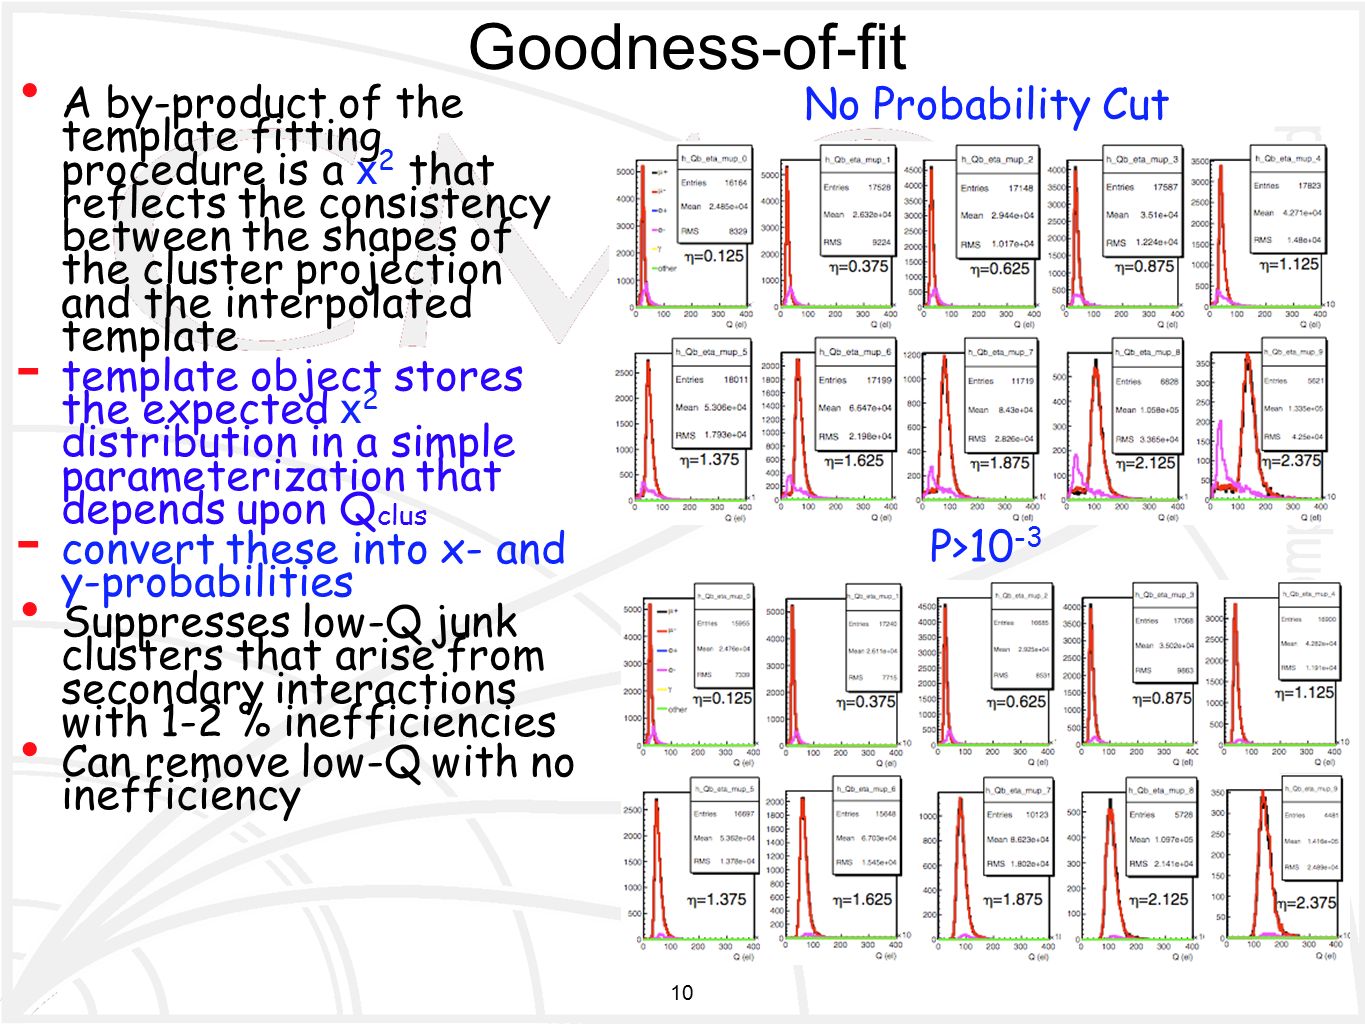 10 Goodness-of-fit A by-product of the template fitting procedure is a x 2 that reflects the consistency between the shapes of the cluster projection and the interpolated template  template object stores the expected x 2 distribution in a simple parameterization that depends upon Q clus - convert these into x- and y-probabilities Suppresses low-Q junk clusters that arise from secondary interactions with 1-2 % inefficiencies Can remove low-Q with no inefficiency No Probability Cut P>10 -3